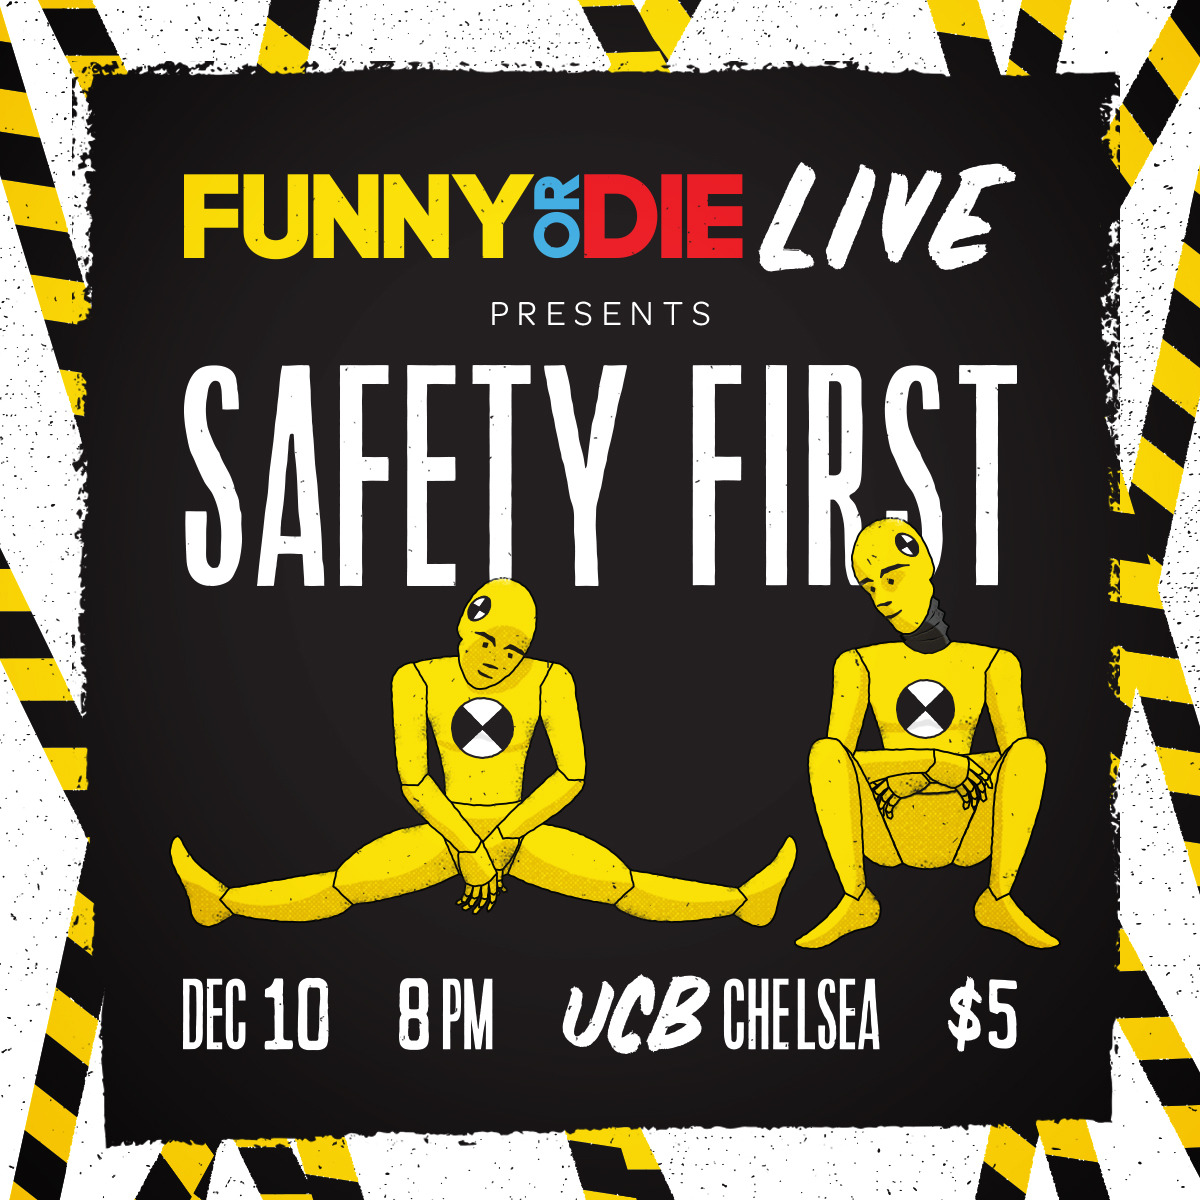 Funny Or Die Live: Safety First
New York! We’re hosting a safety-themed sketch-comedy show starring the FOD NY staff TONIGHT at UCB Chelsea!
Cancel your other plans immediately and get your tickets here!